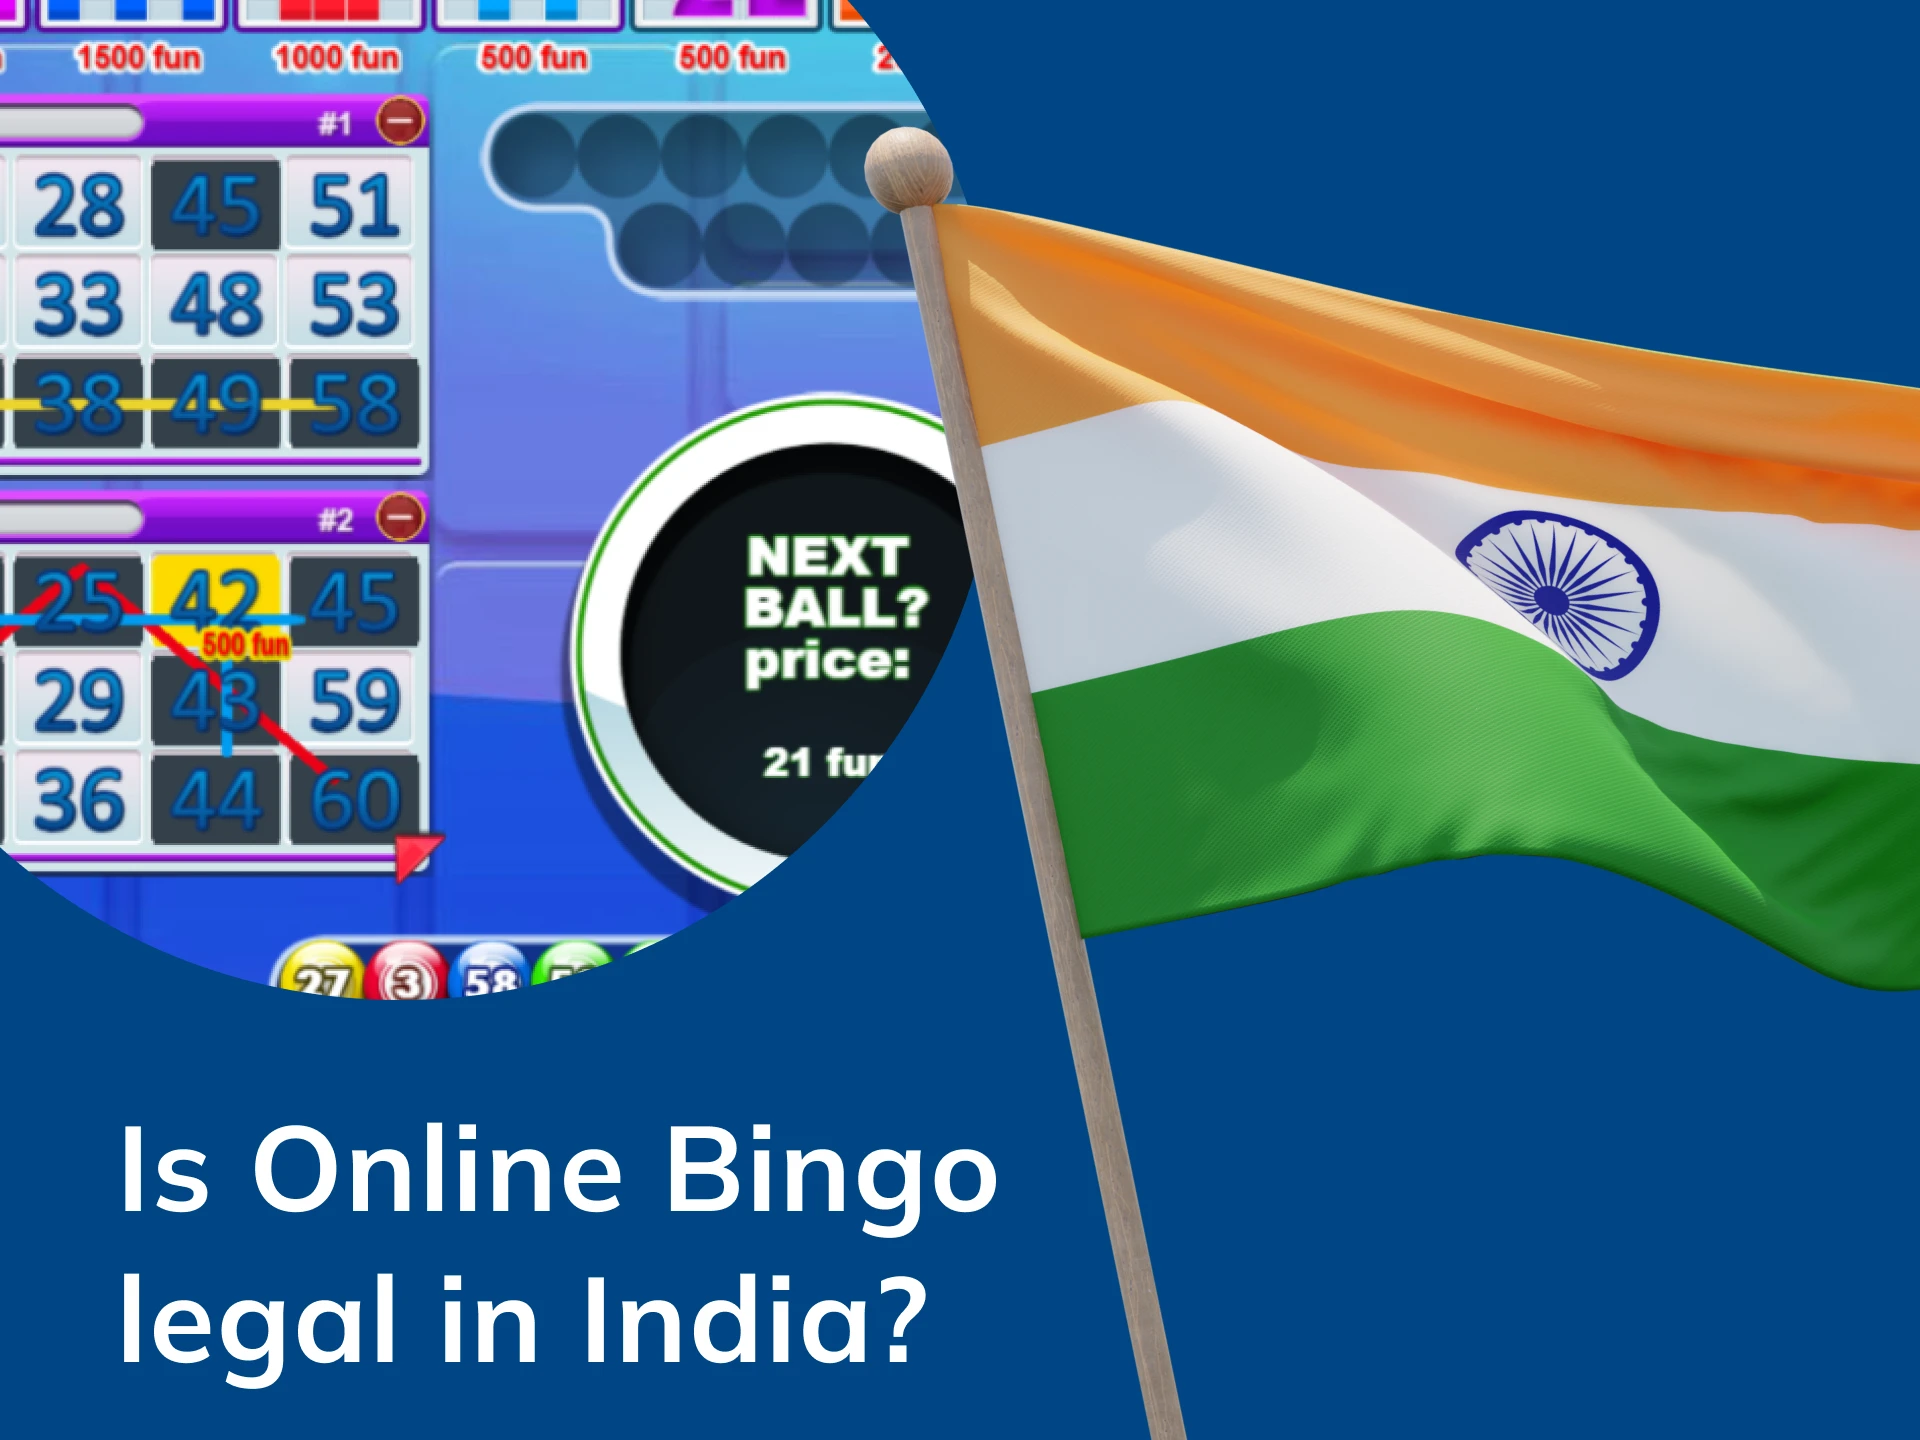 Online bingo is completely safe and legal.